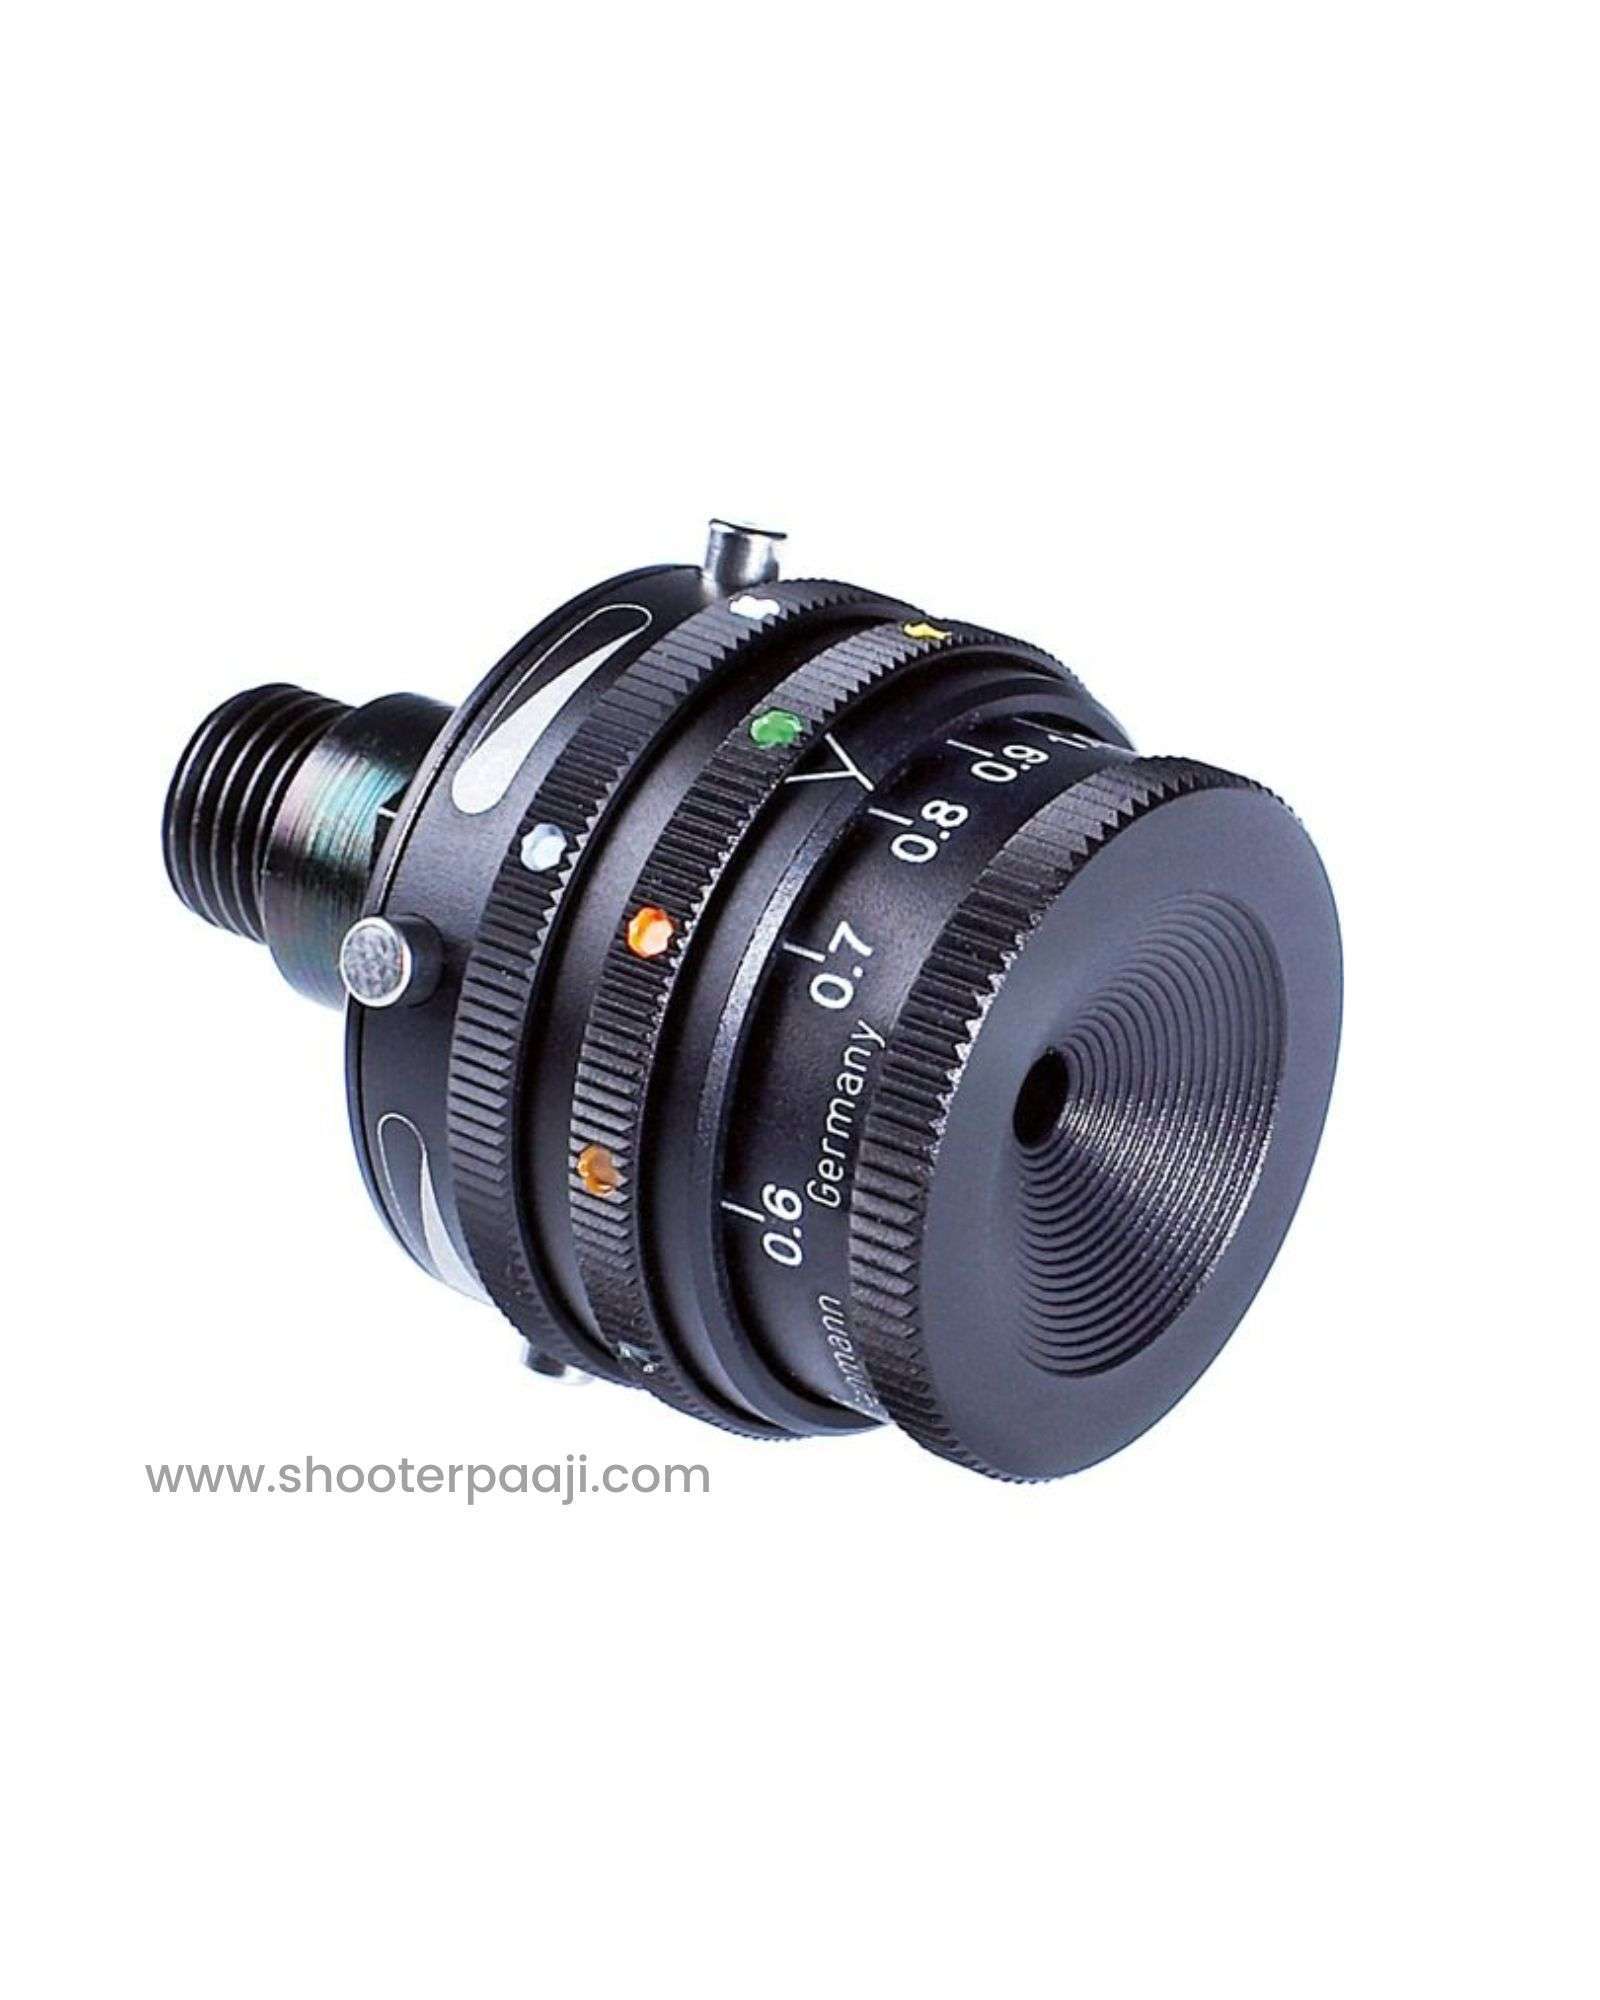 565 Gehmann iris aperture with 6-color filters and twin polarizers for 50m 3P rifle shooting, offering precise light control and improved sight picture.